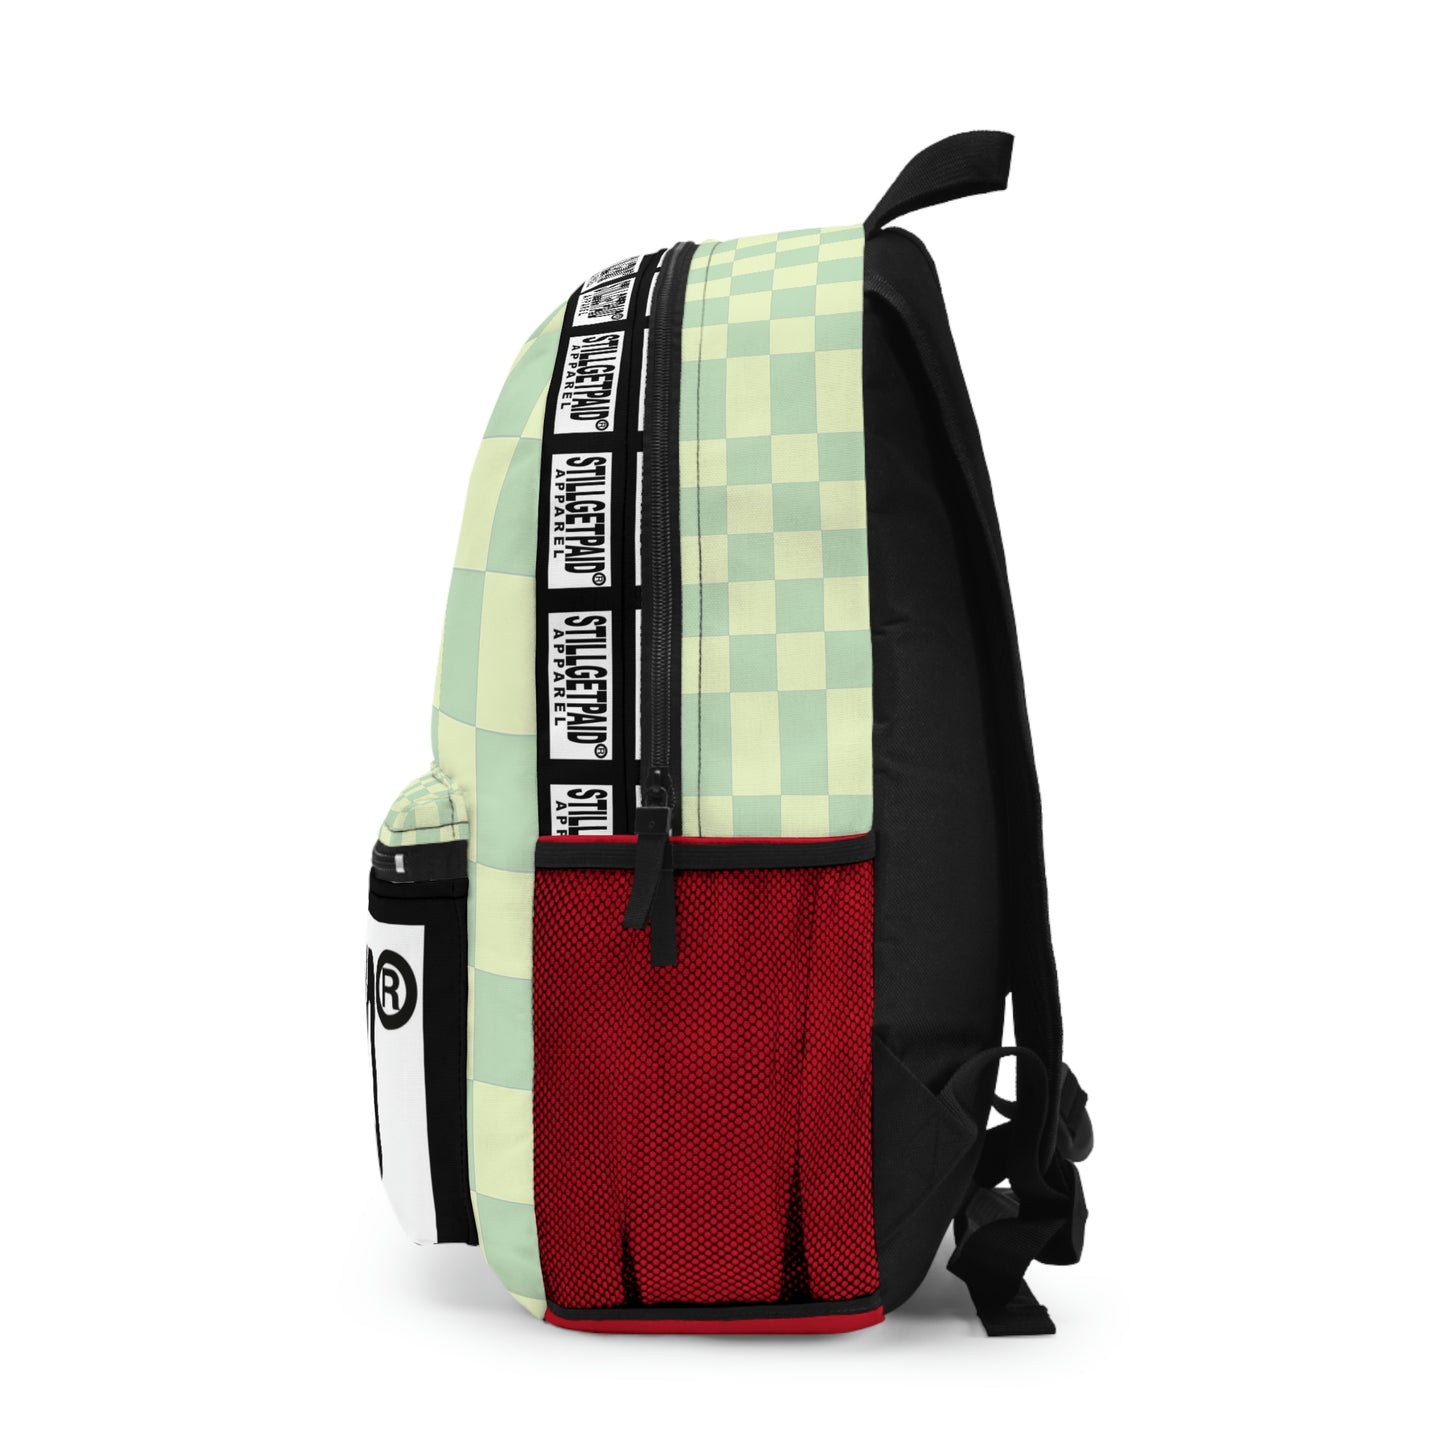 STILL GET PAID APPAREL Backpack